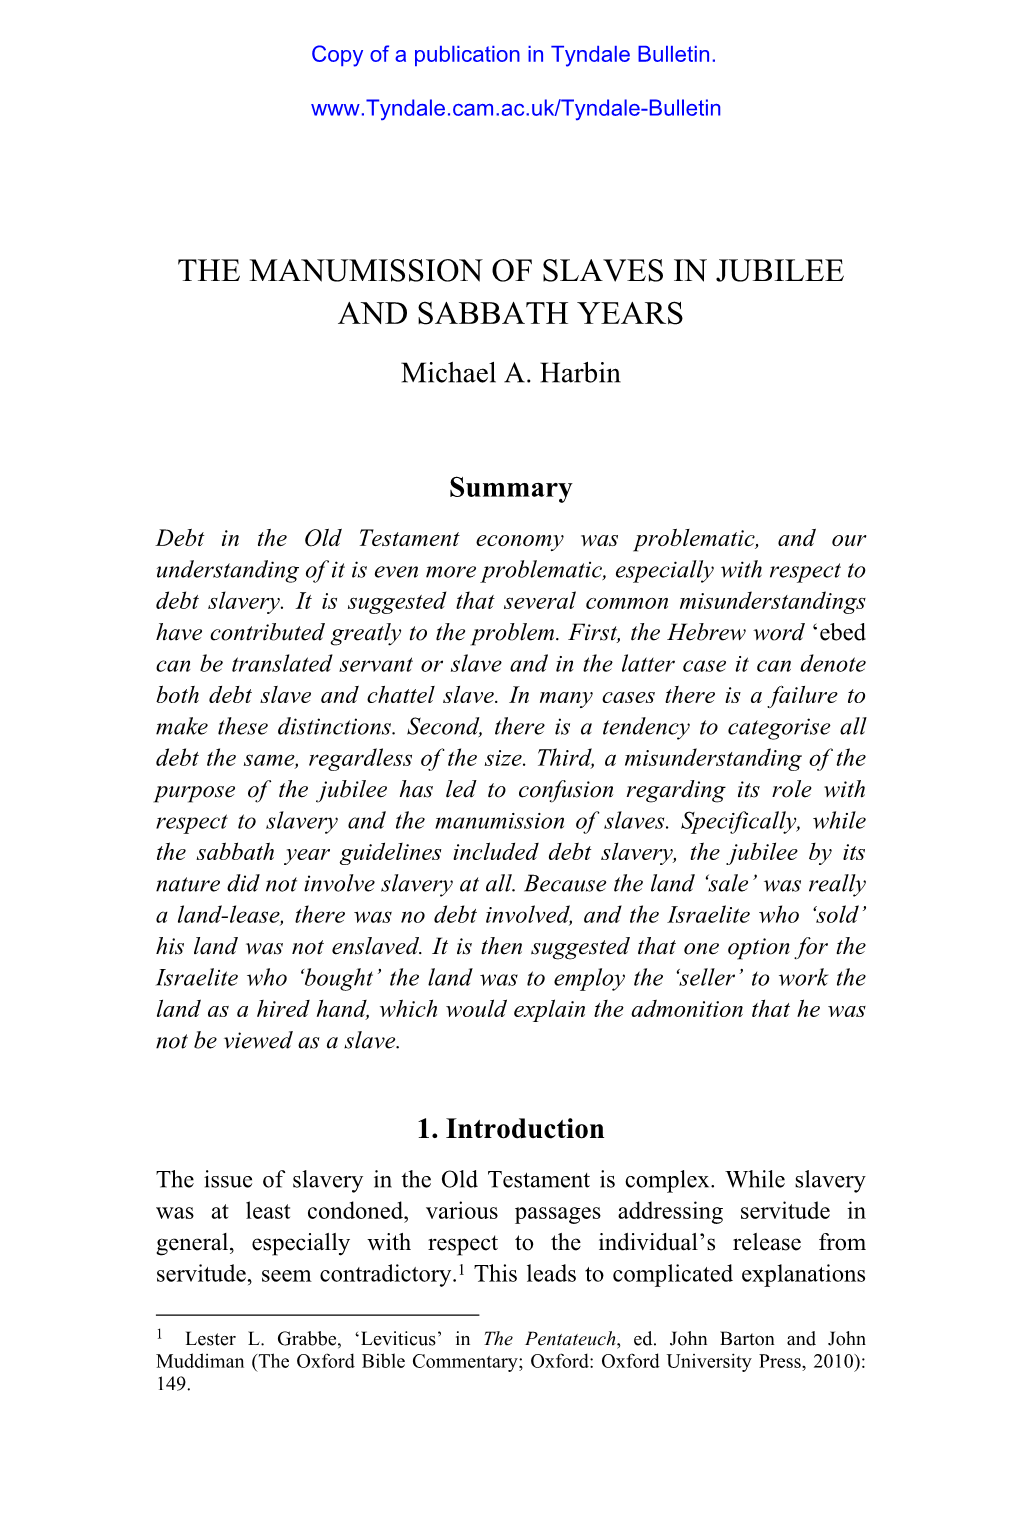 THE MANUMISSION of SLAVES in JUBILEE and SABBATH YEARS Michael A